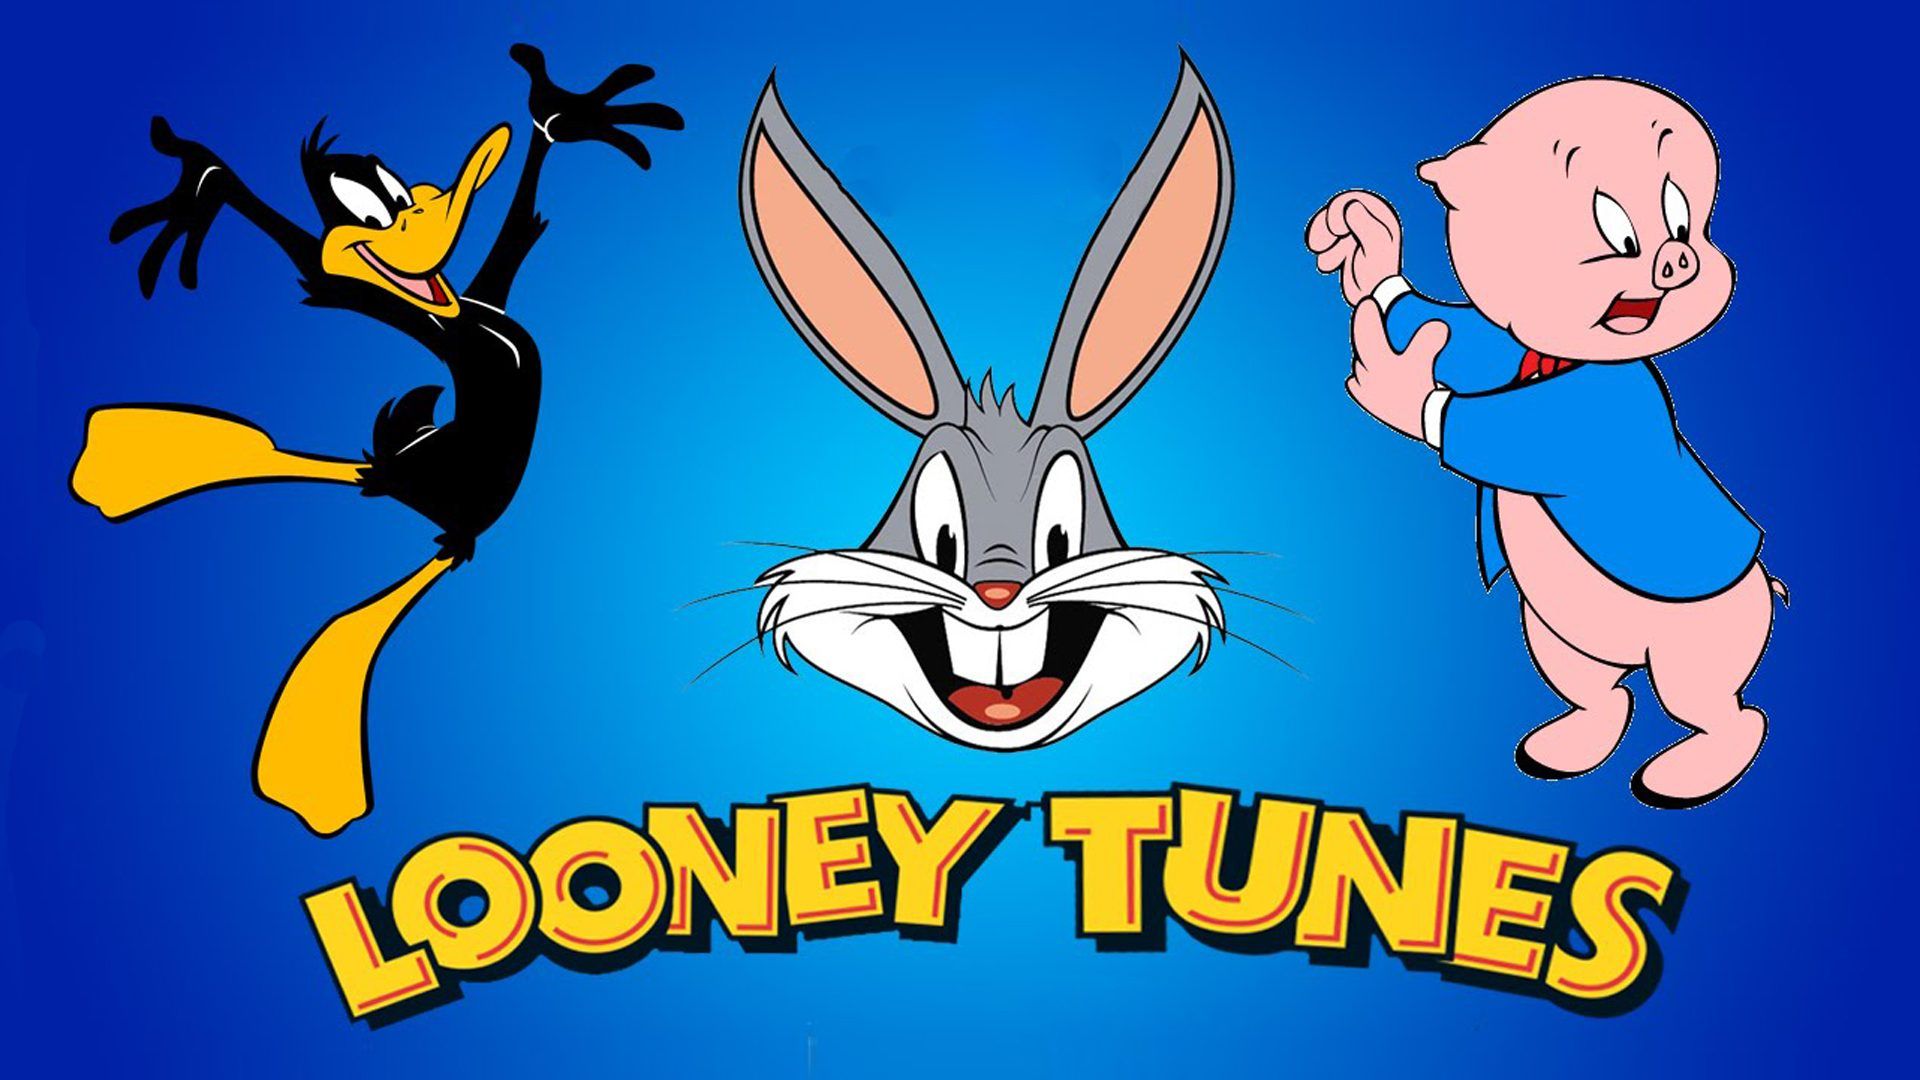 Looney Tunes Movie Bugs Bunny Daffy Duck And Porky Pig Cartoons